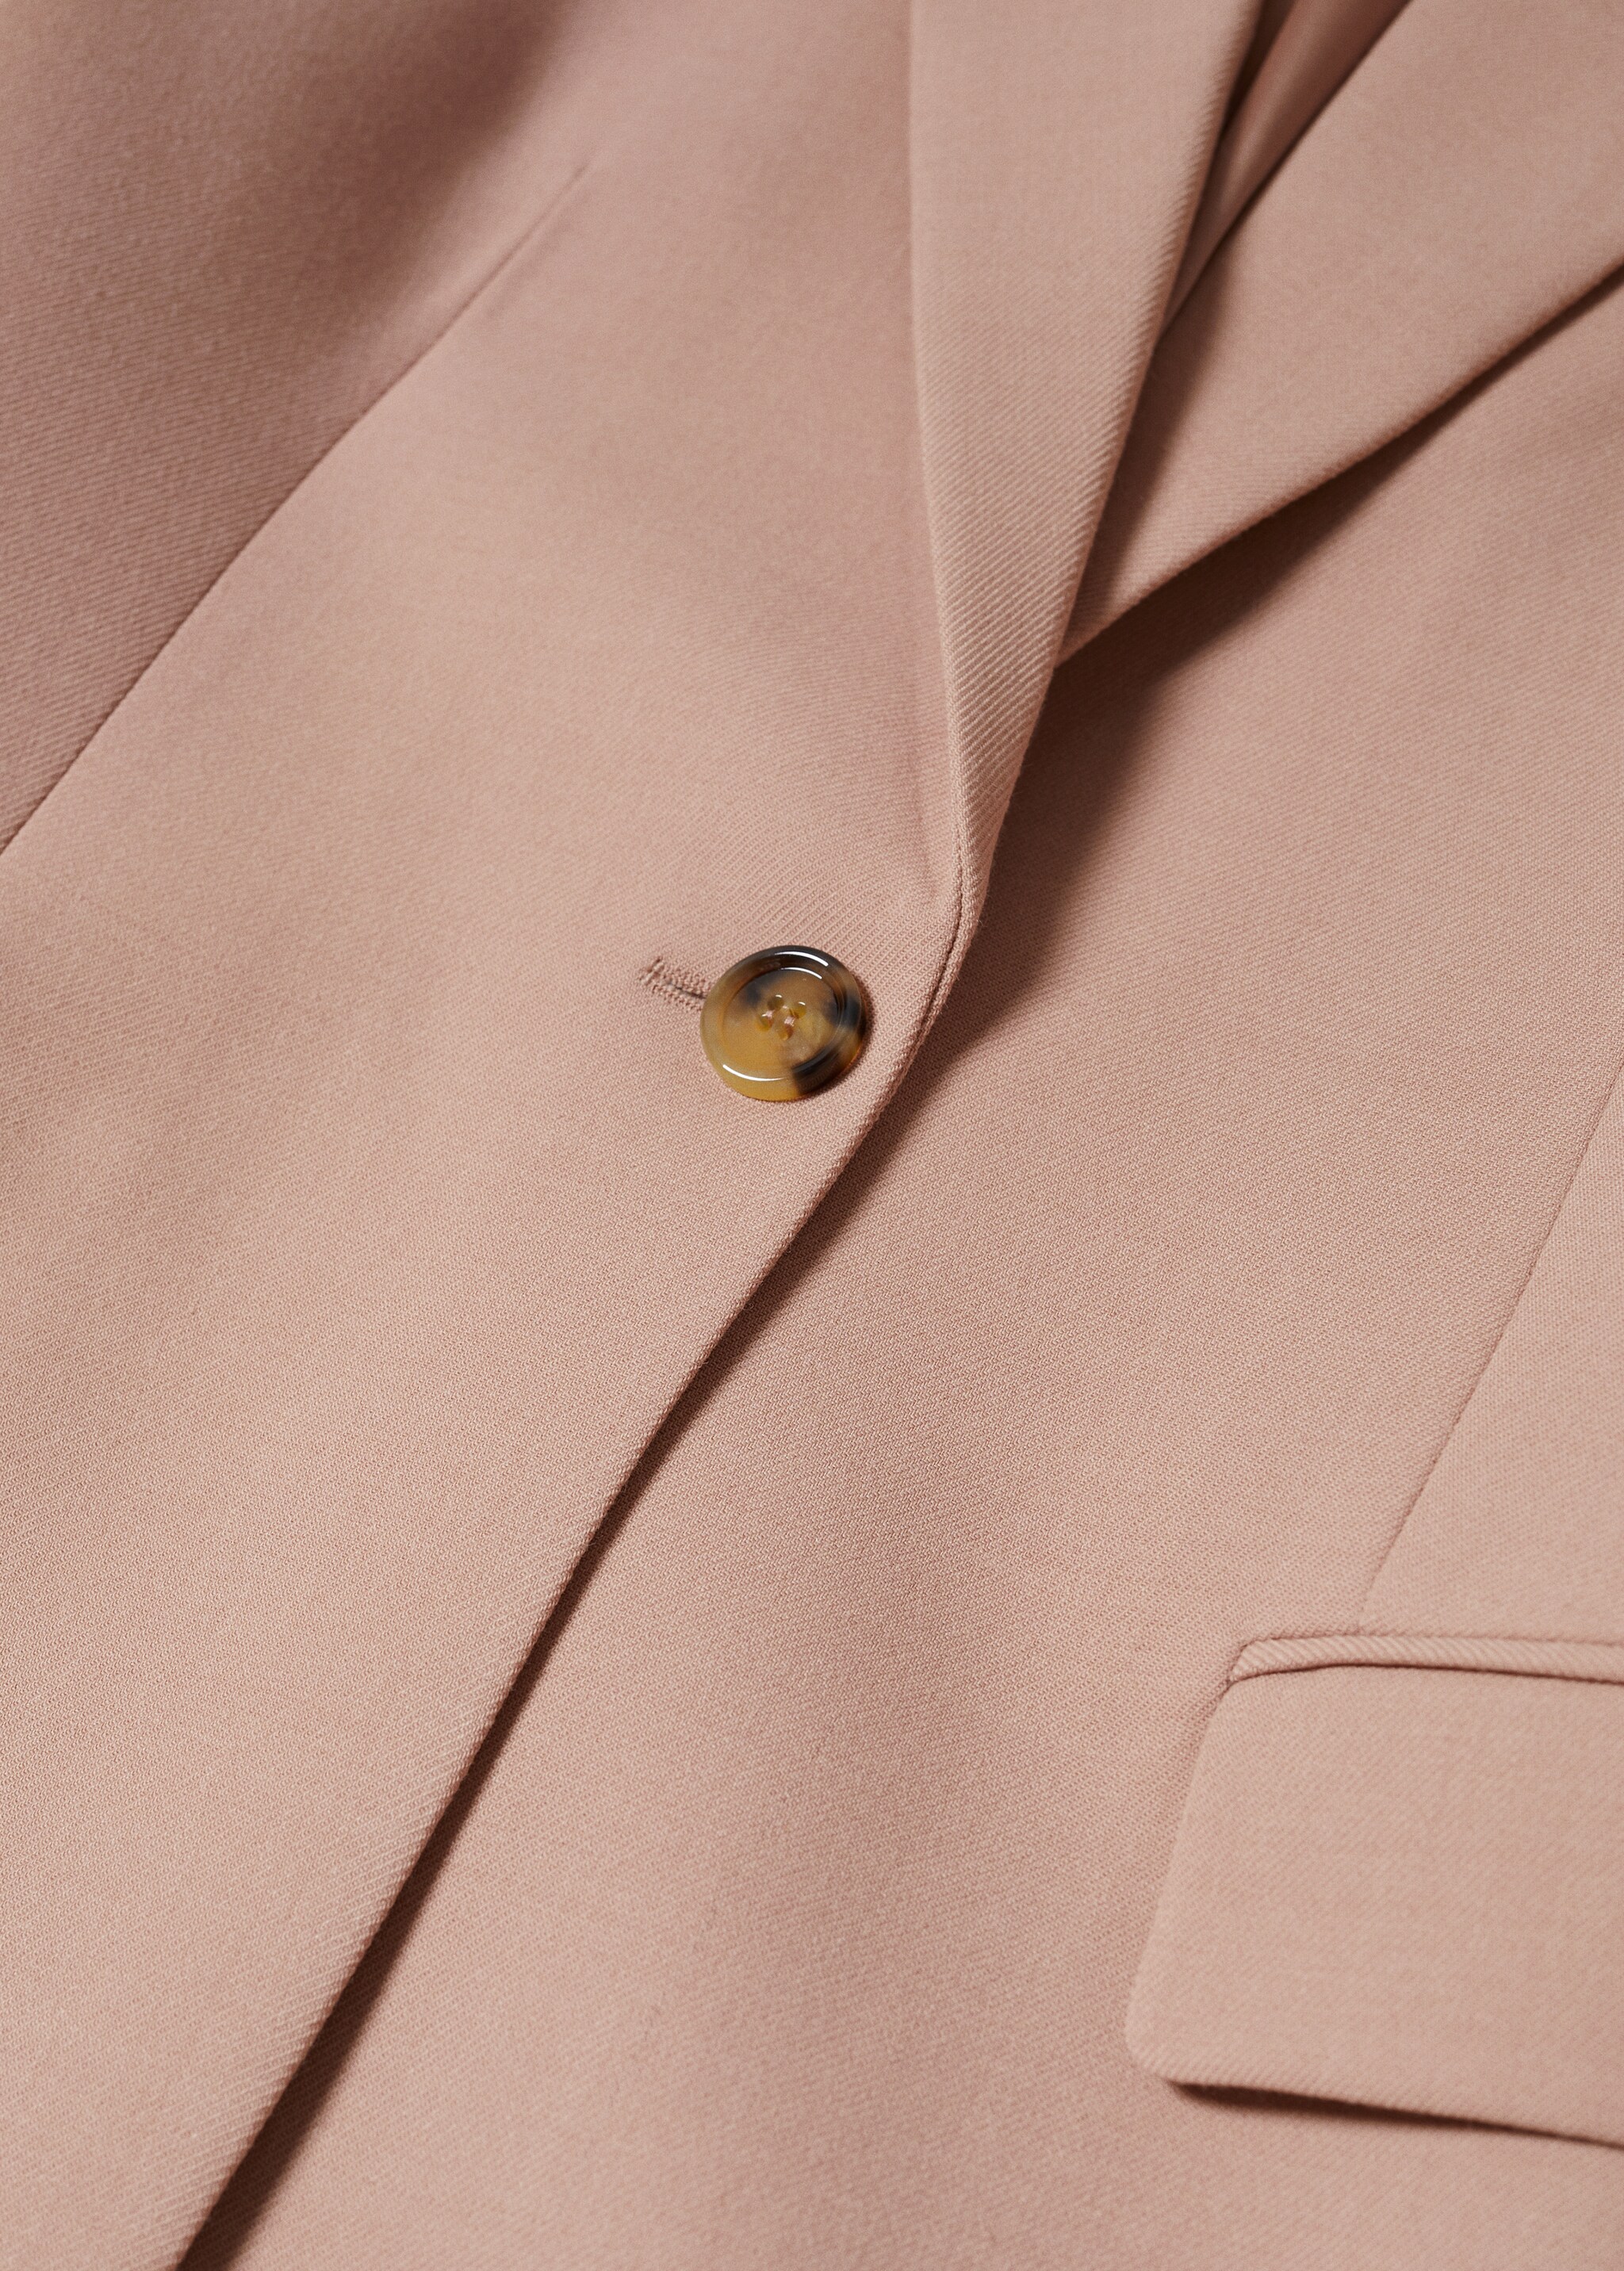 Suit jacket seams - Details of the article 8